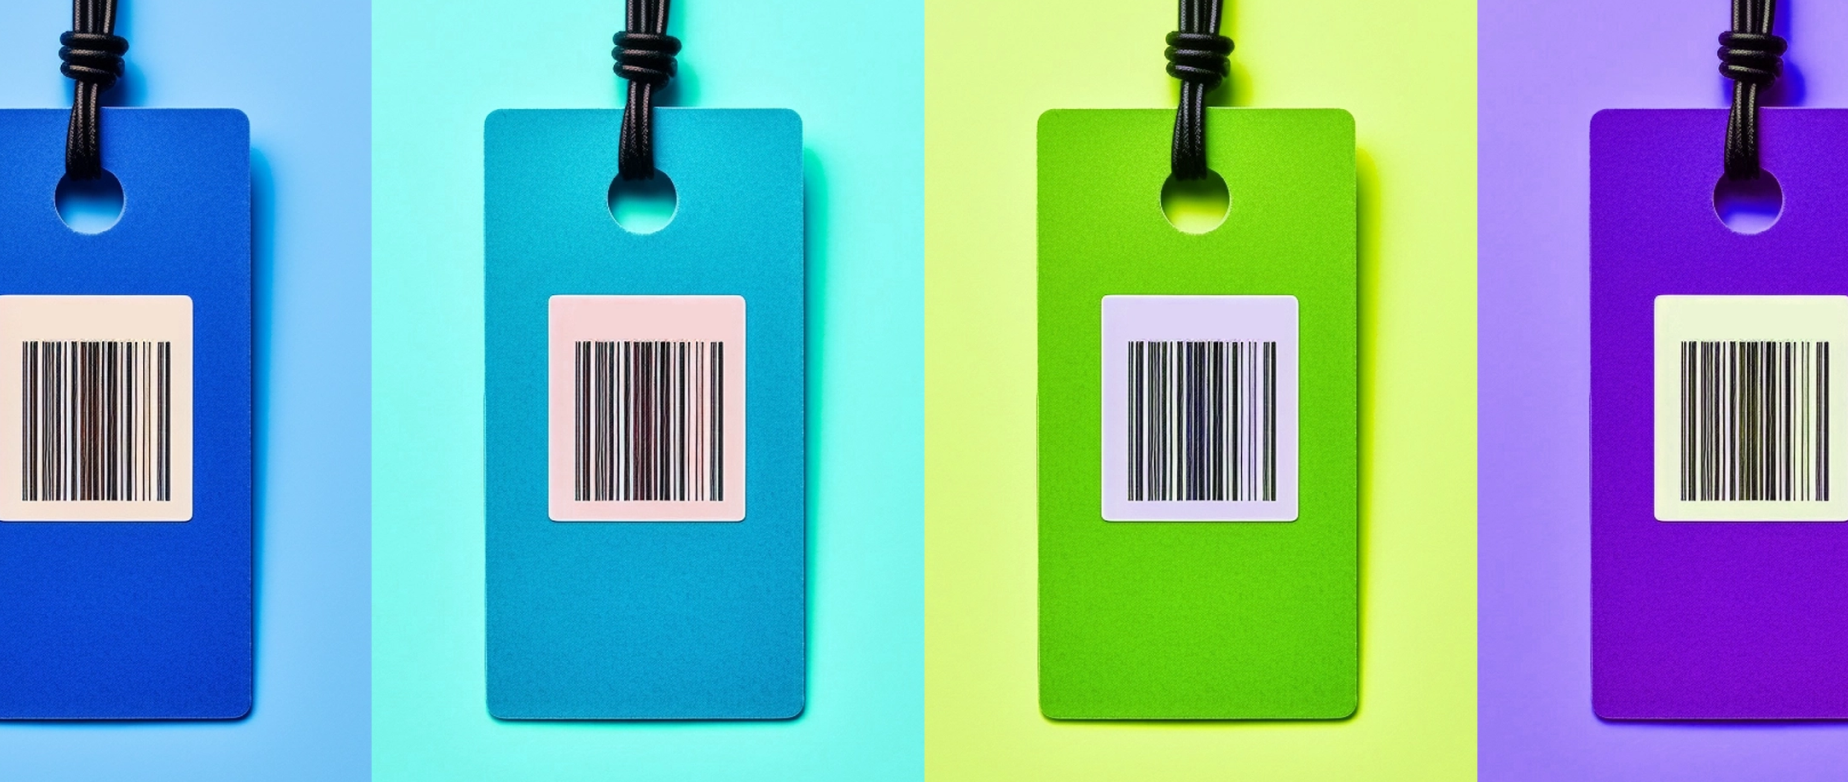 A blue, light blue, green, and purple price tags with bar codes next to each other on blue, light blue, yellow and purple backgrounds.